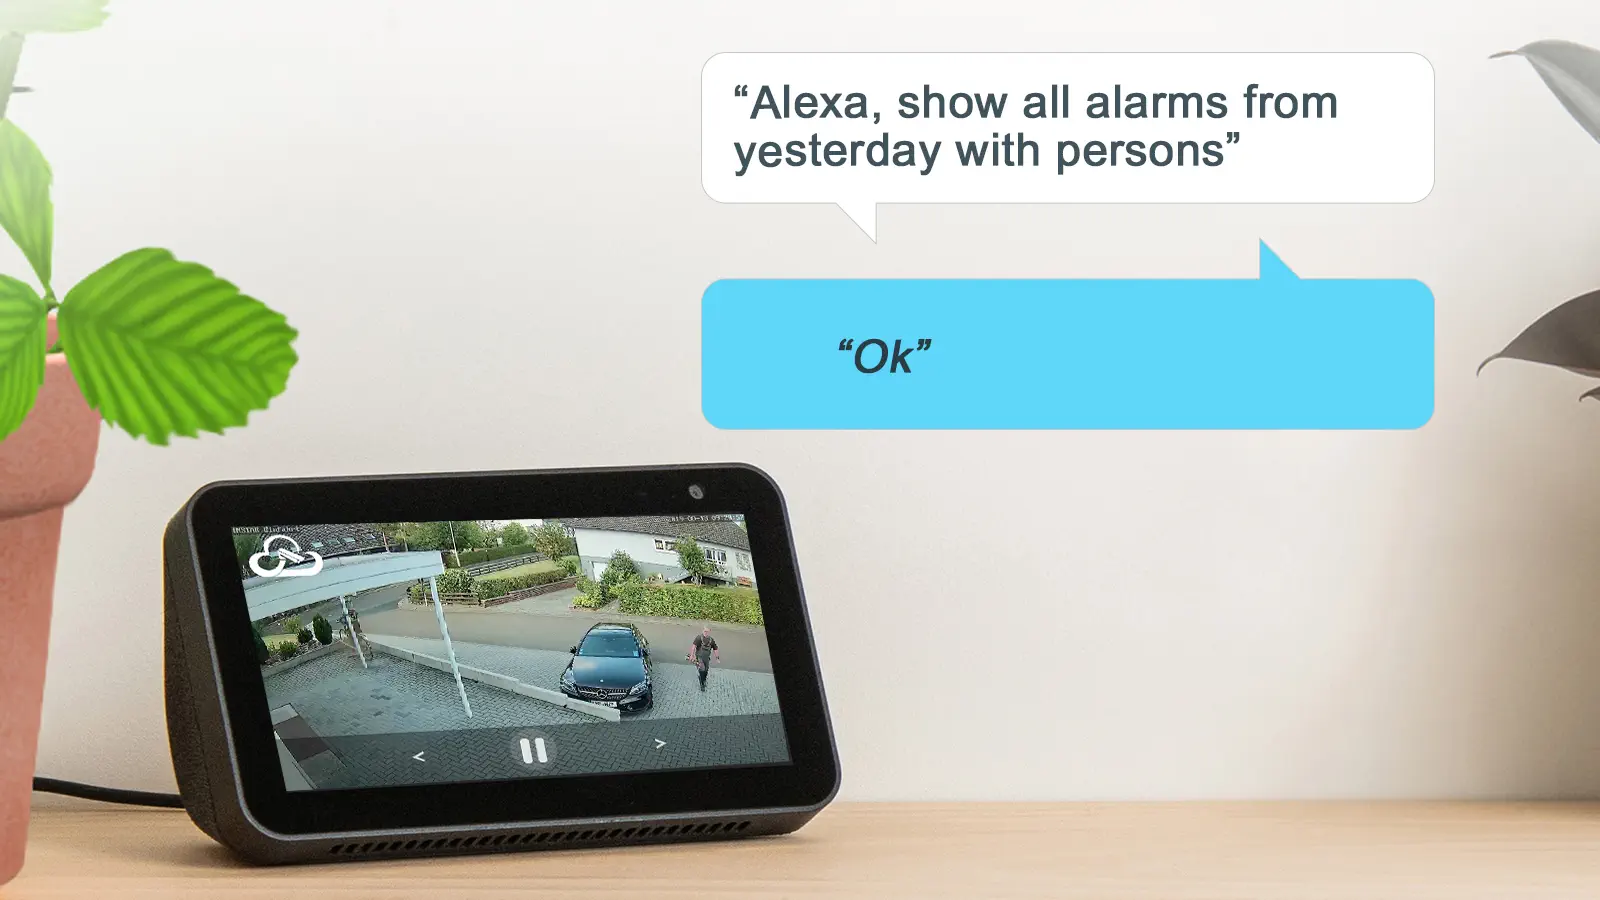 Alexa Play alarm videos based on detected objects and date